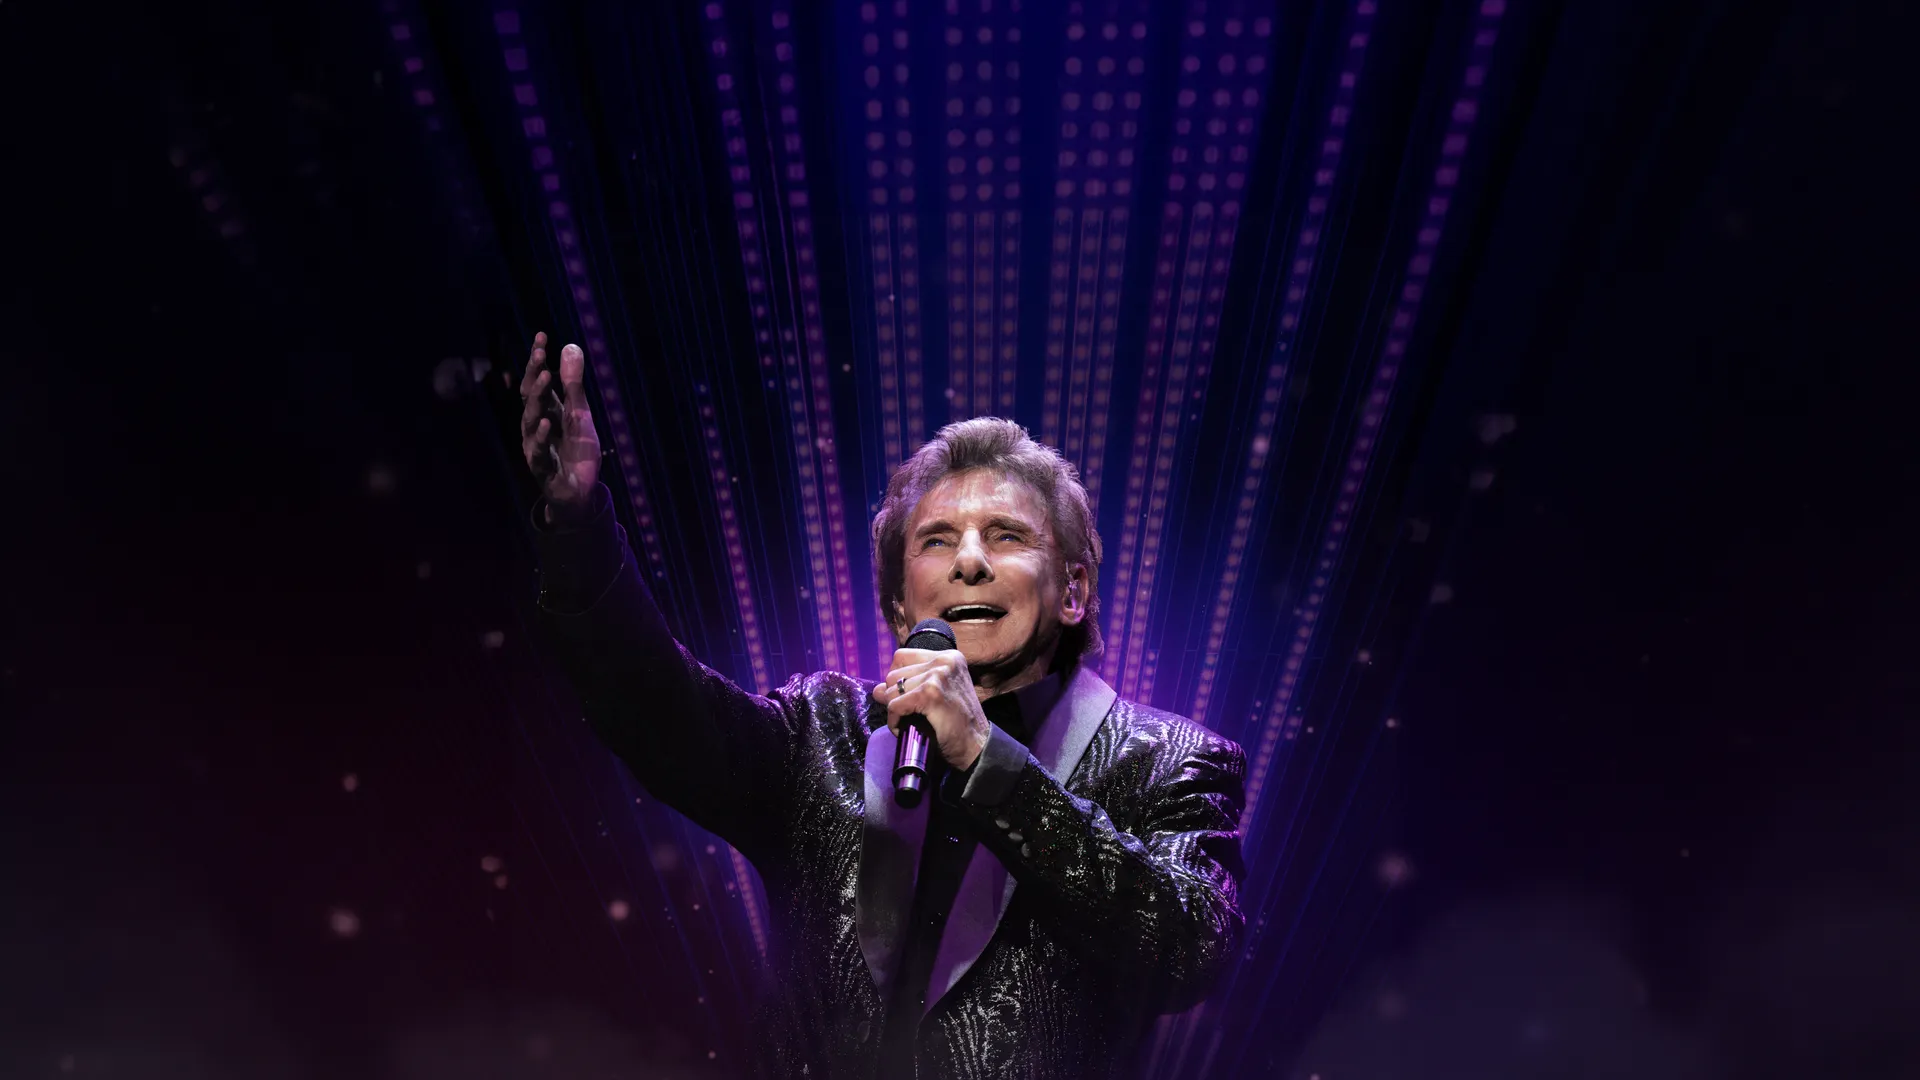 Travel advice for getting to Barry Manilow at Co-op Live has been issued